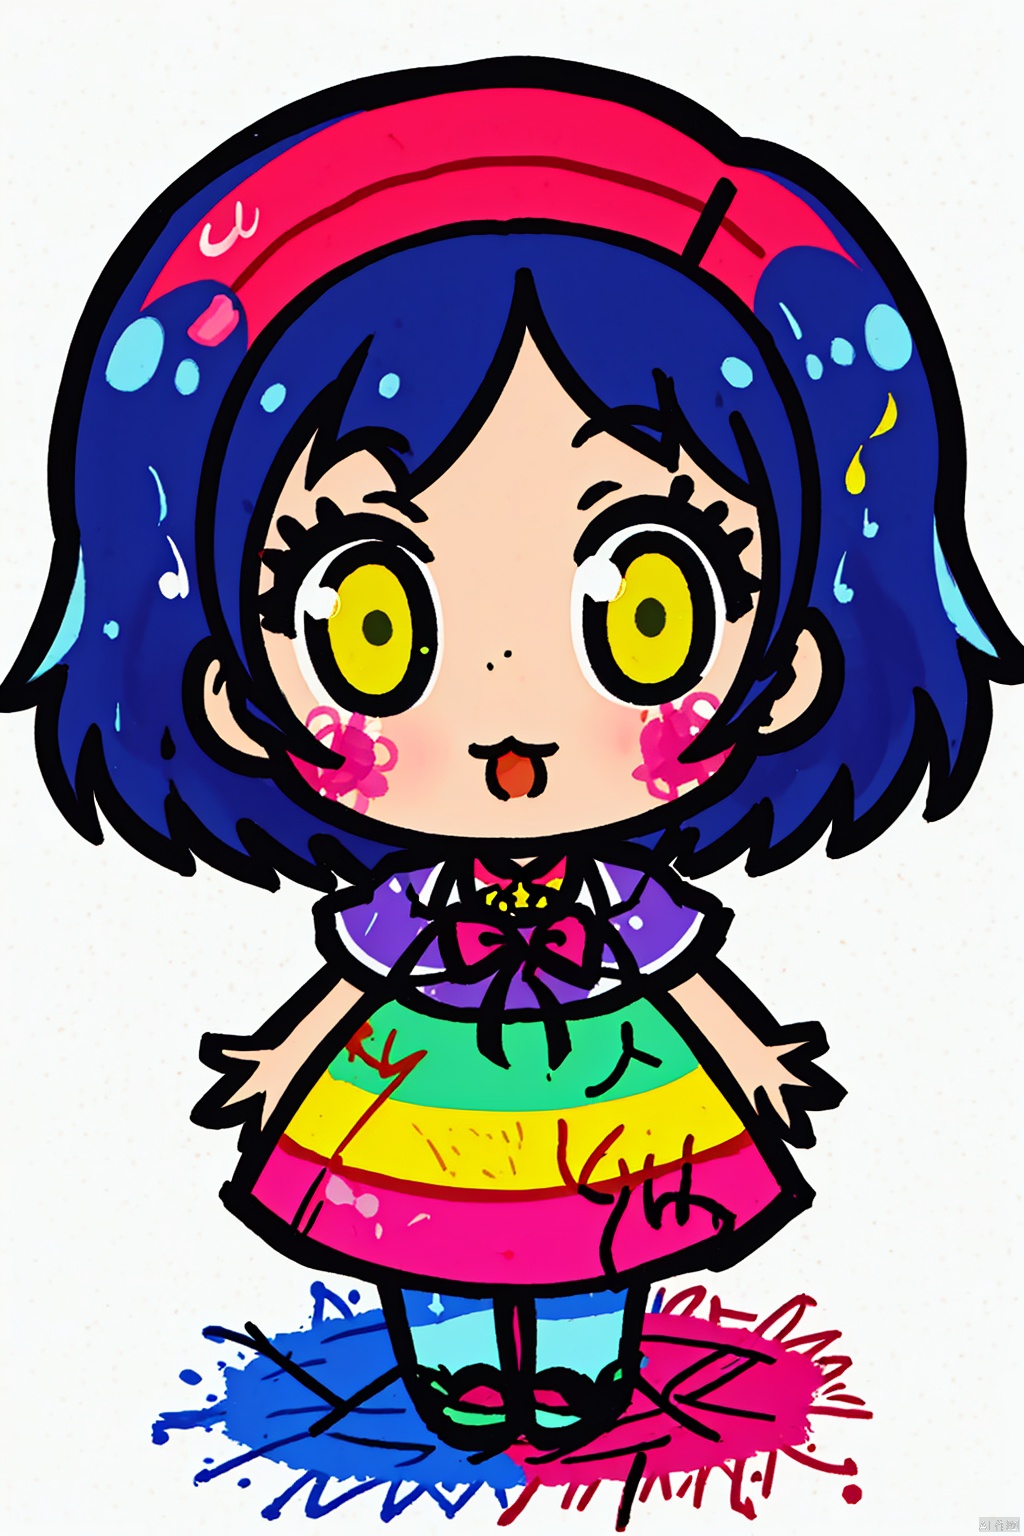  A girl,solo,cute,lines,rainbow colors,colored spray paint,colored inkdrops,, children, 1girl, simple drawing, concept art, chibi